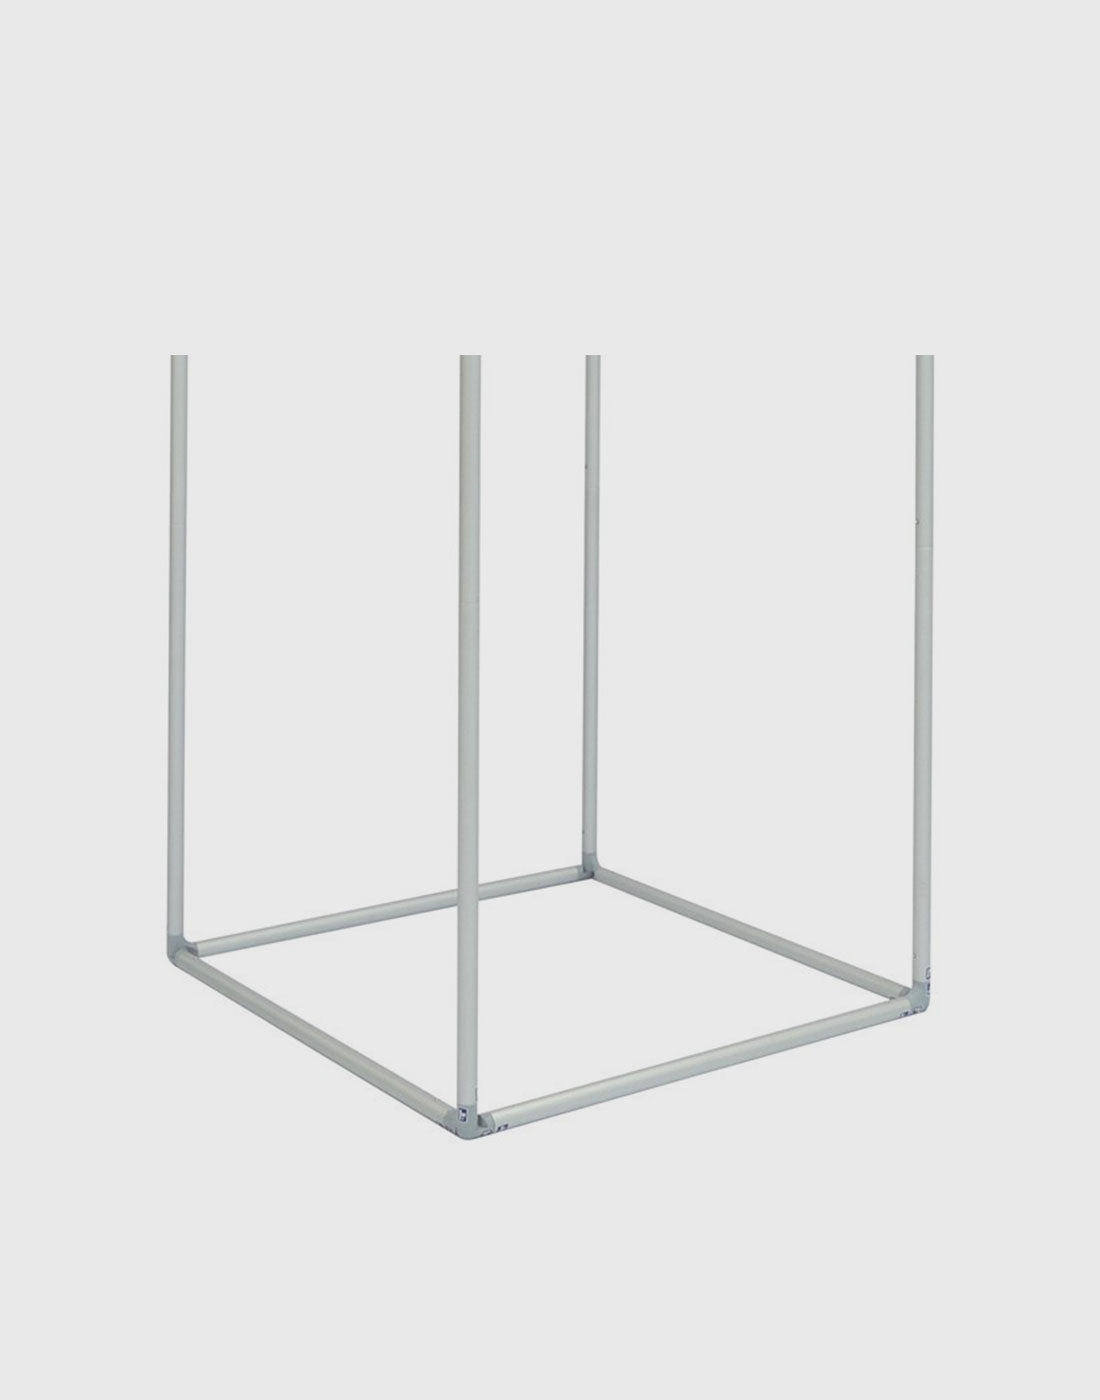 EZ Cubic Tower Fabric Display - Backdropsource